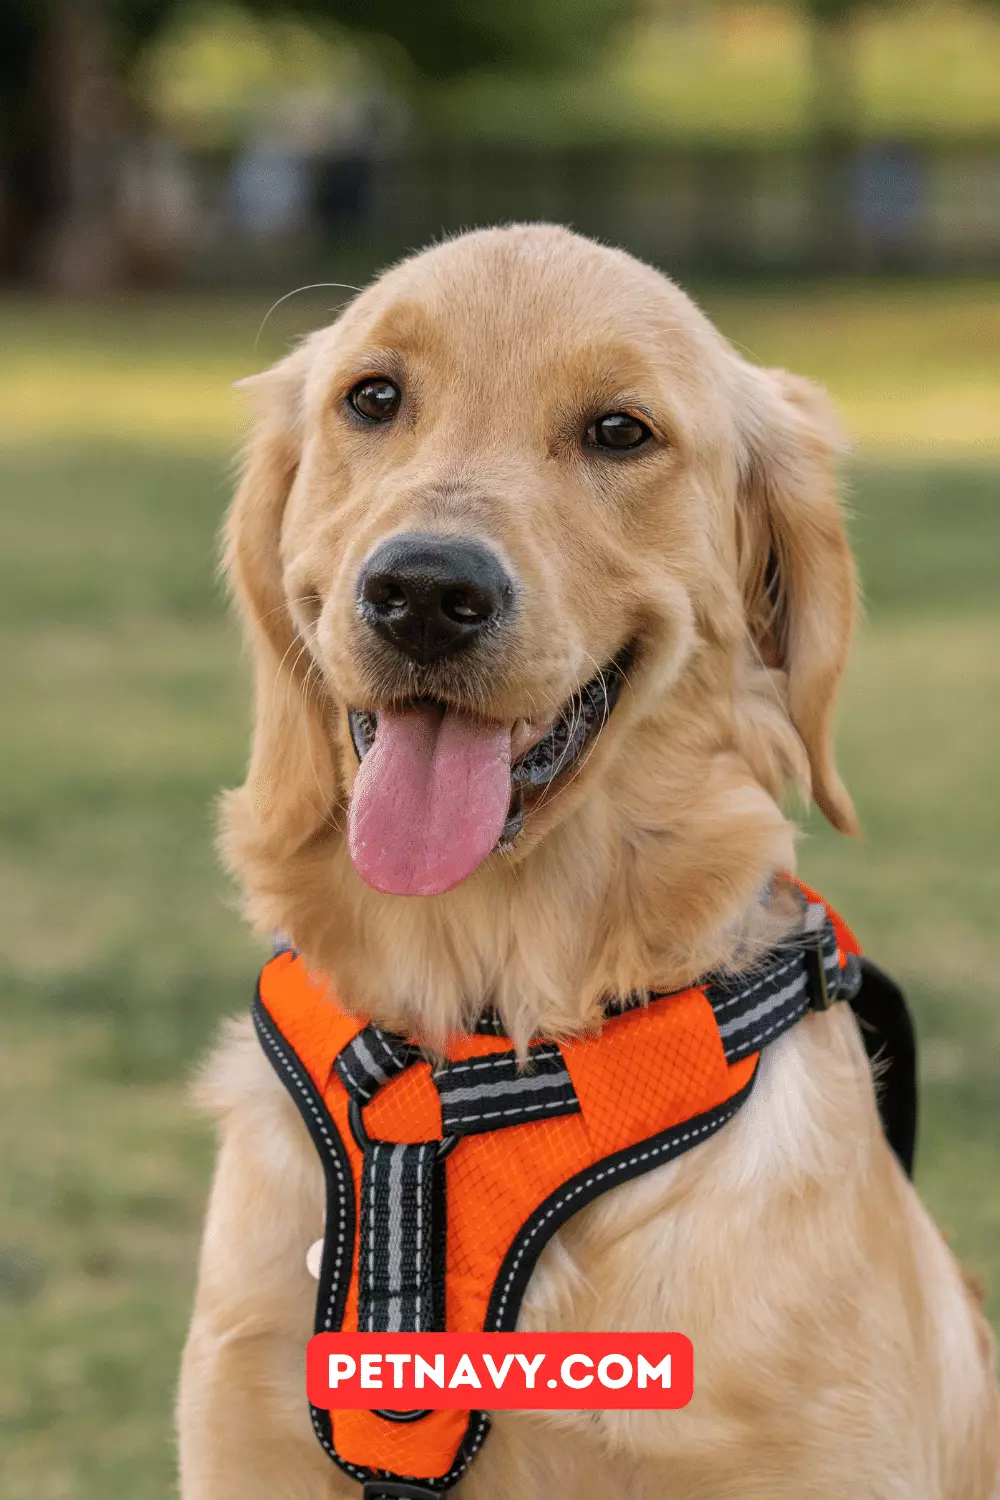 The Dog Walker Company Harness: Quality and Comfort